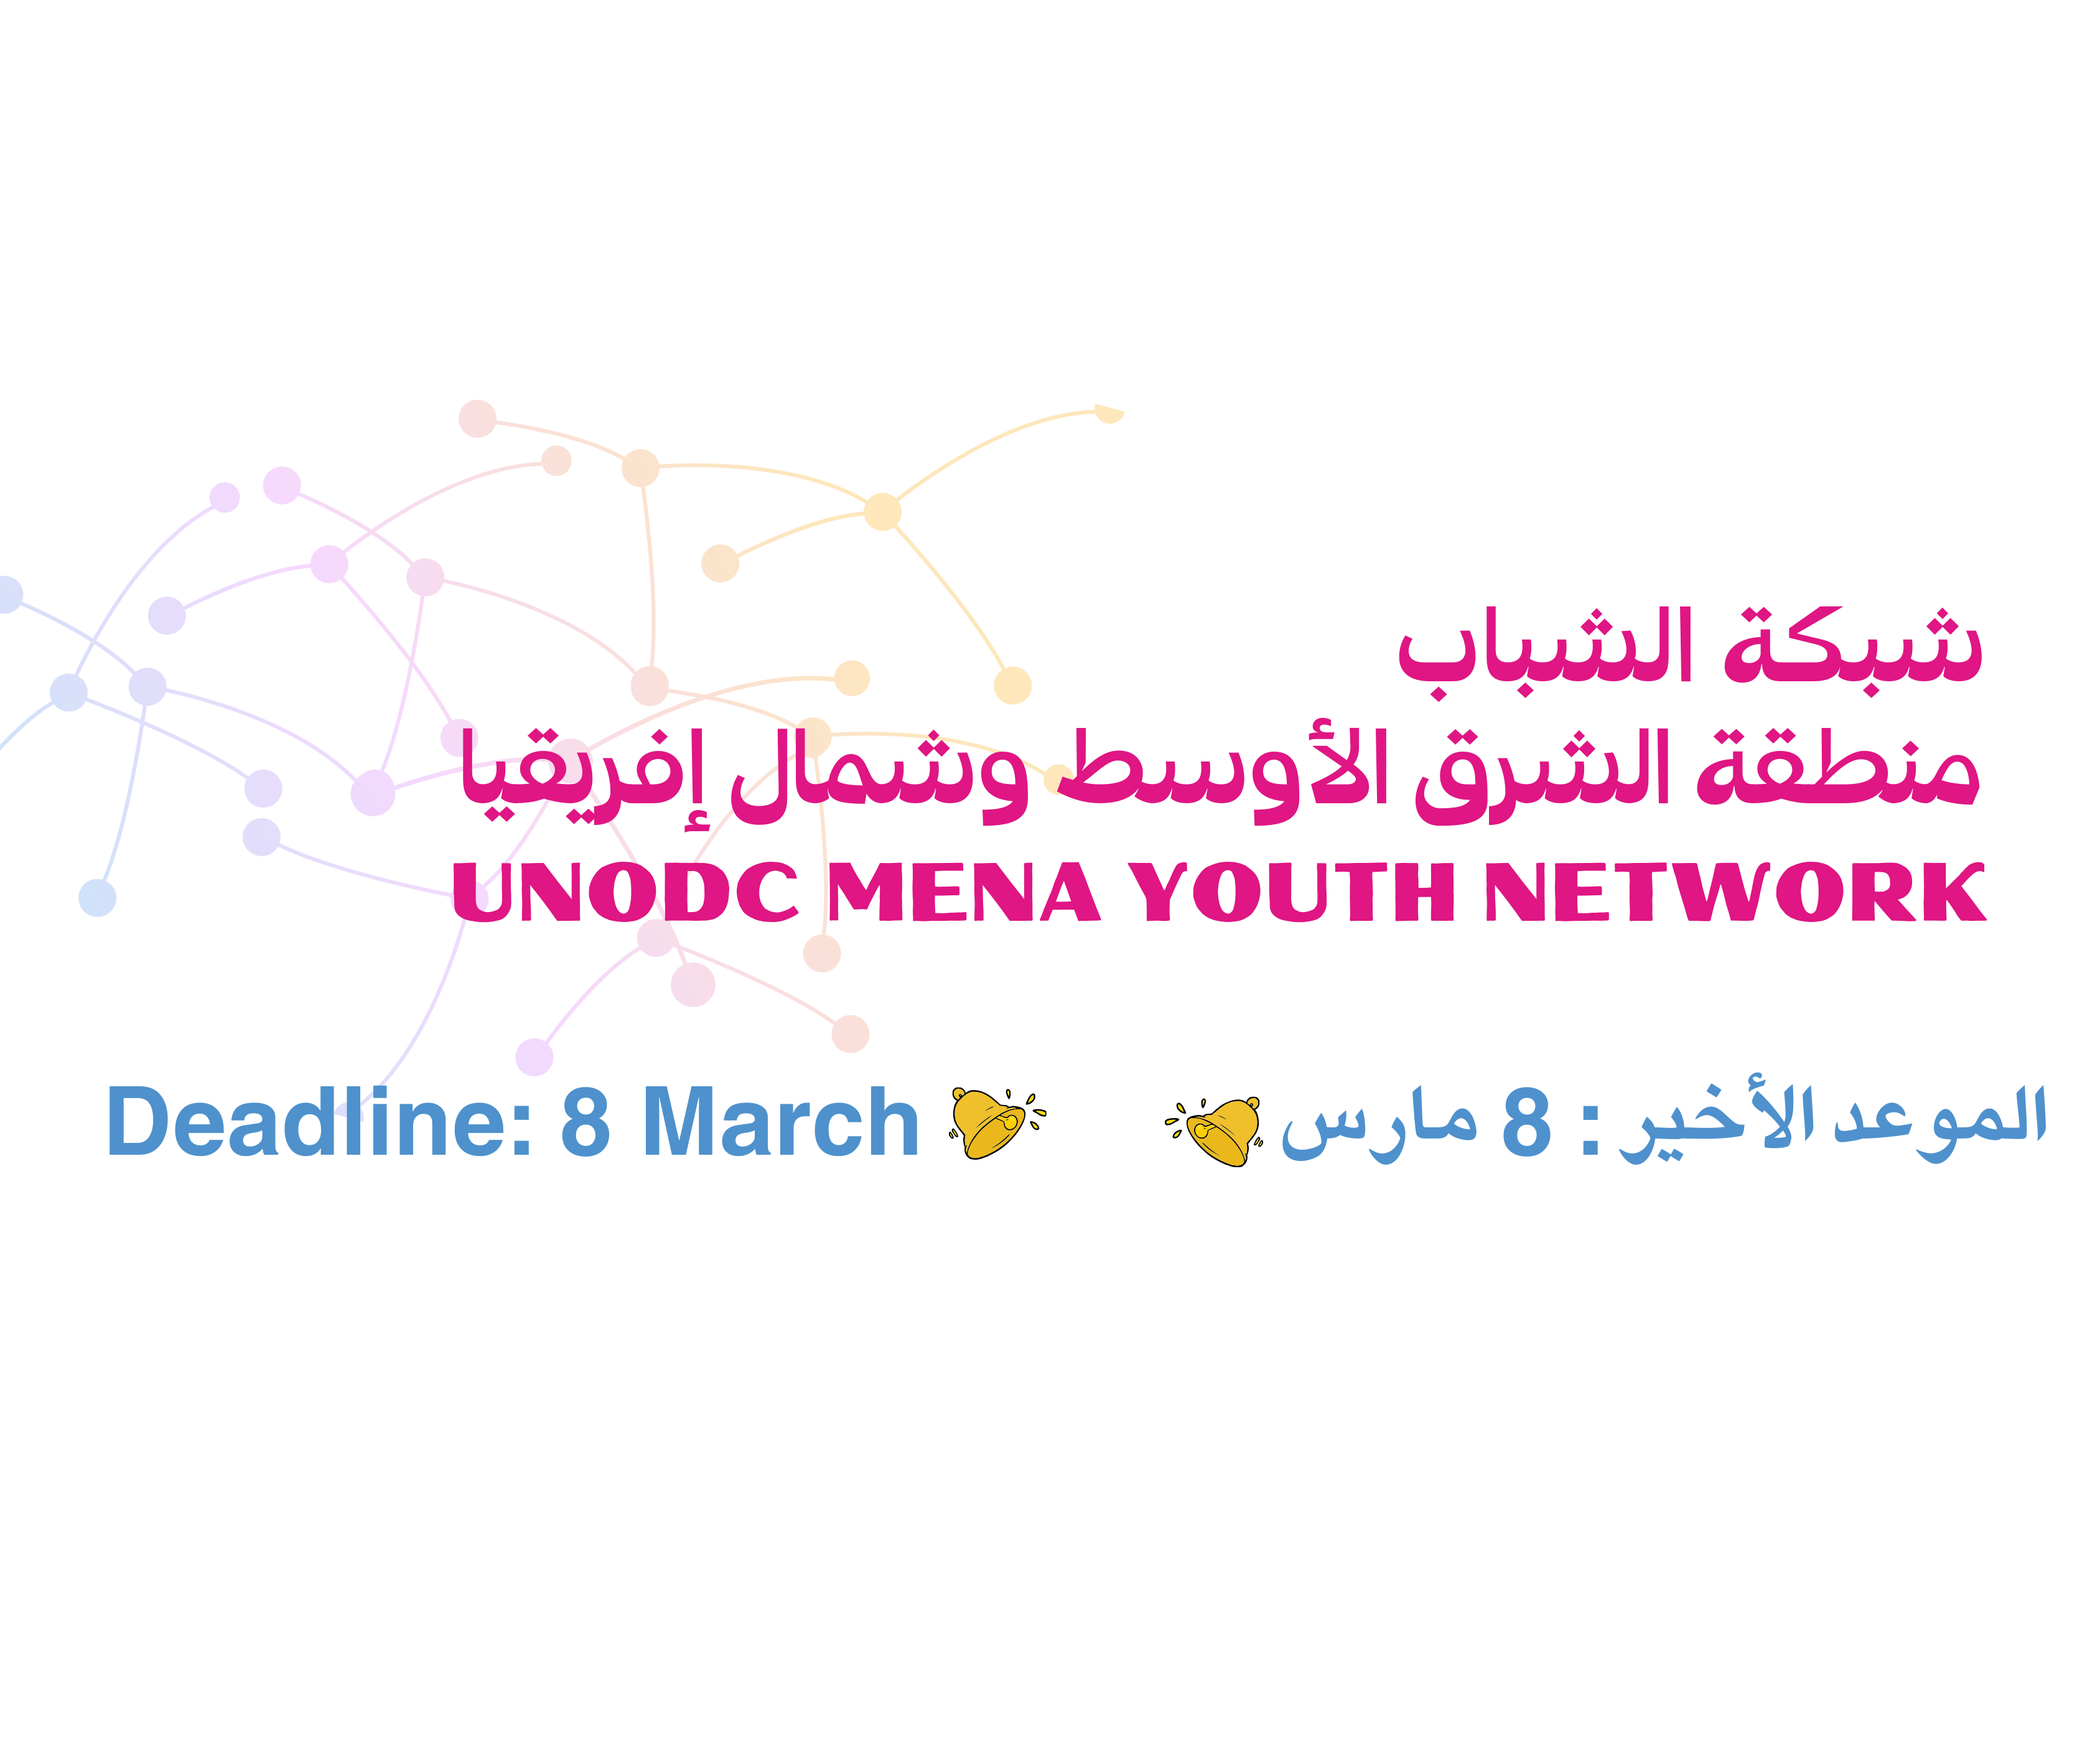 UNODC MENA Youth Network - Call for Applications